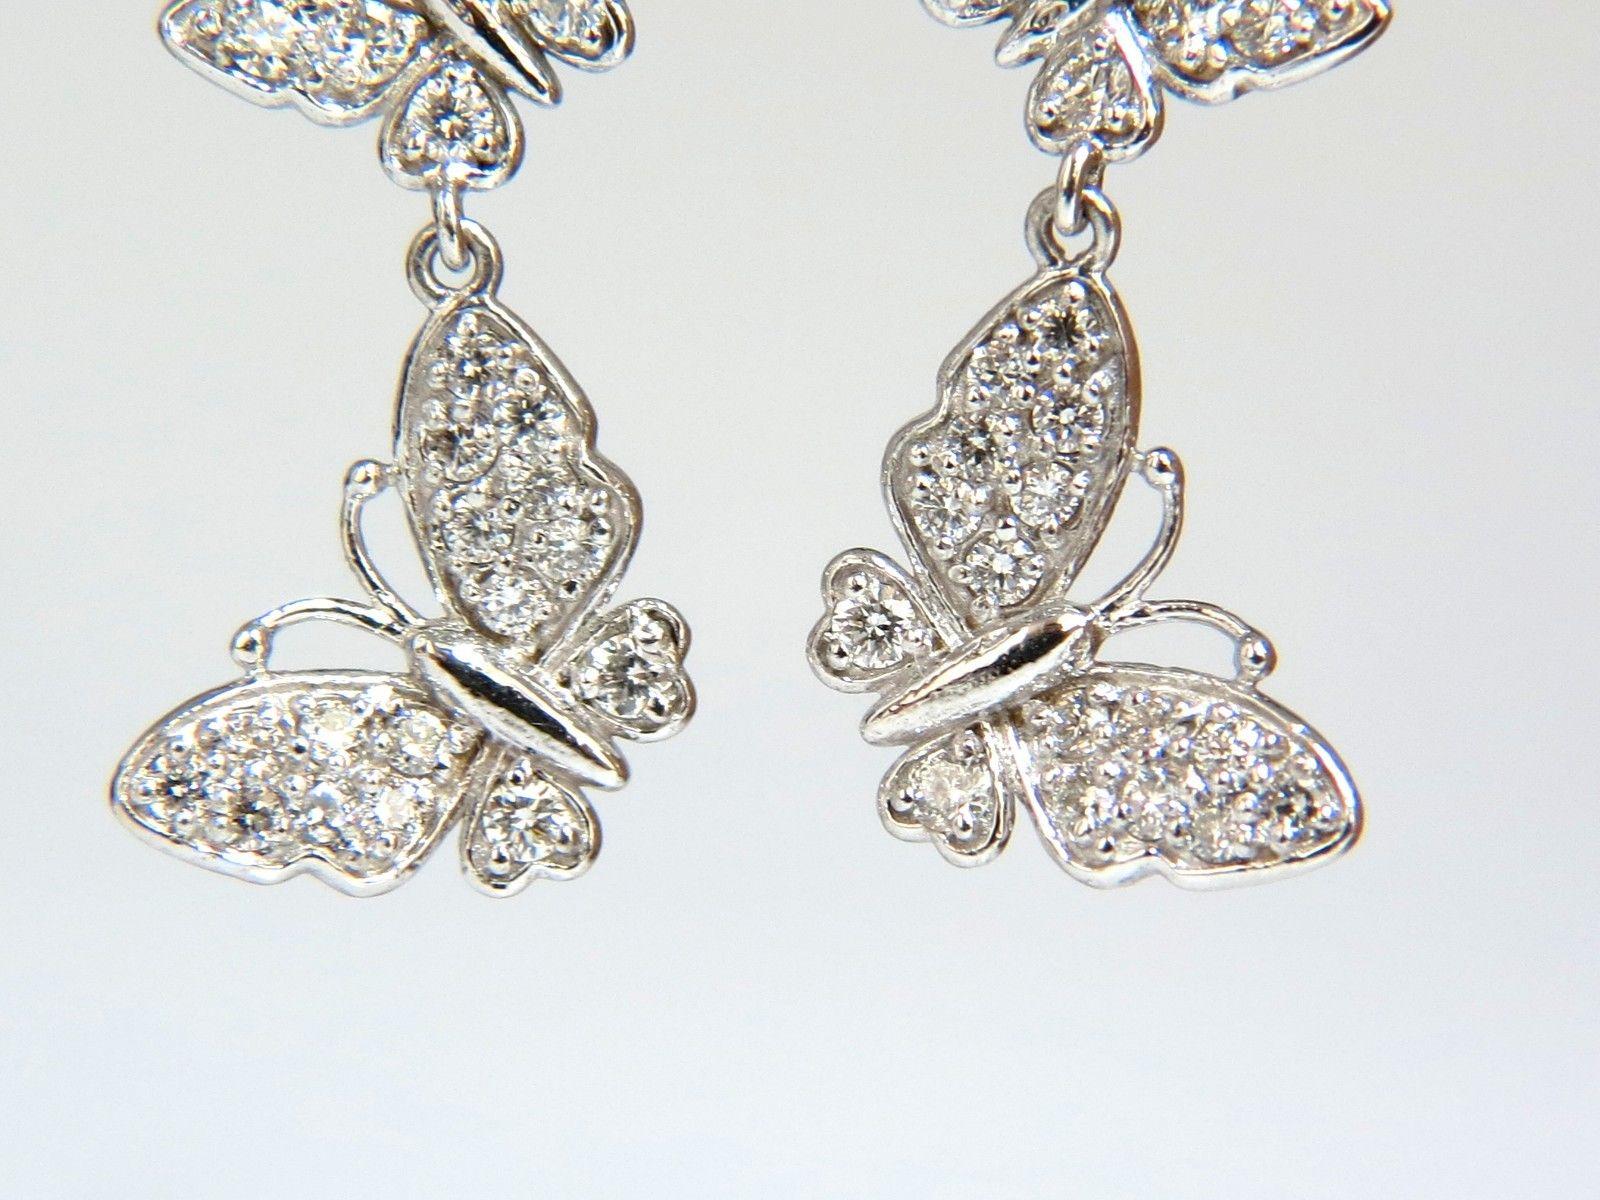 Butterflies Dangling

1.00ct. Natural diamonds  

Rounds, Full cut brilliants.

G- color Vs-2  Clarity. 

Secure lever on hoops

Excellent detail.

14kt. white gold

5.5 grams.

1.5 inch long

 .50 Inch Diameter of larger butterfly at lower